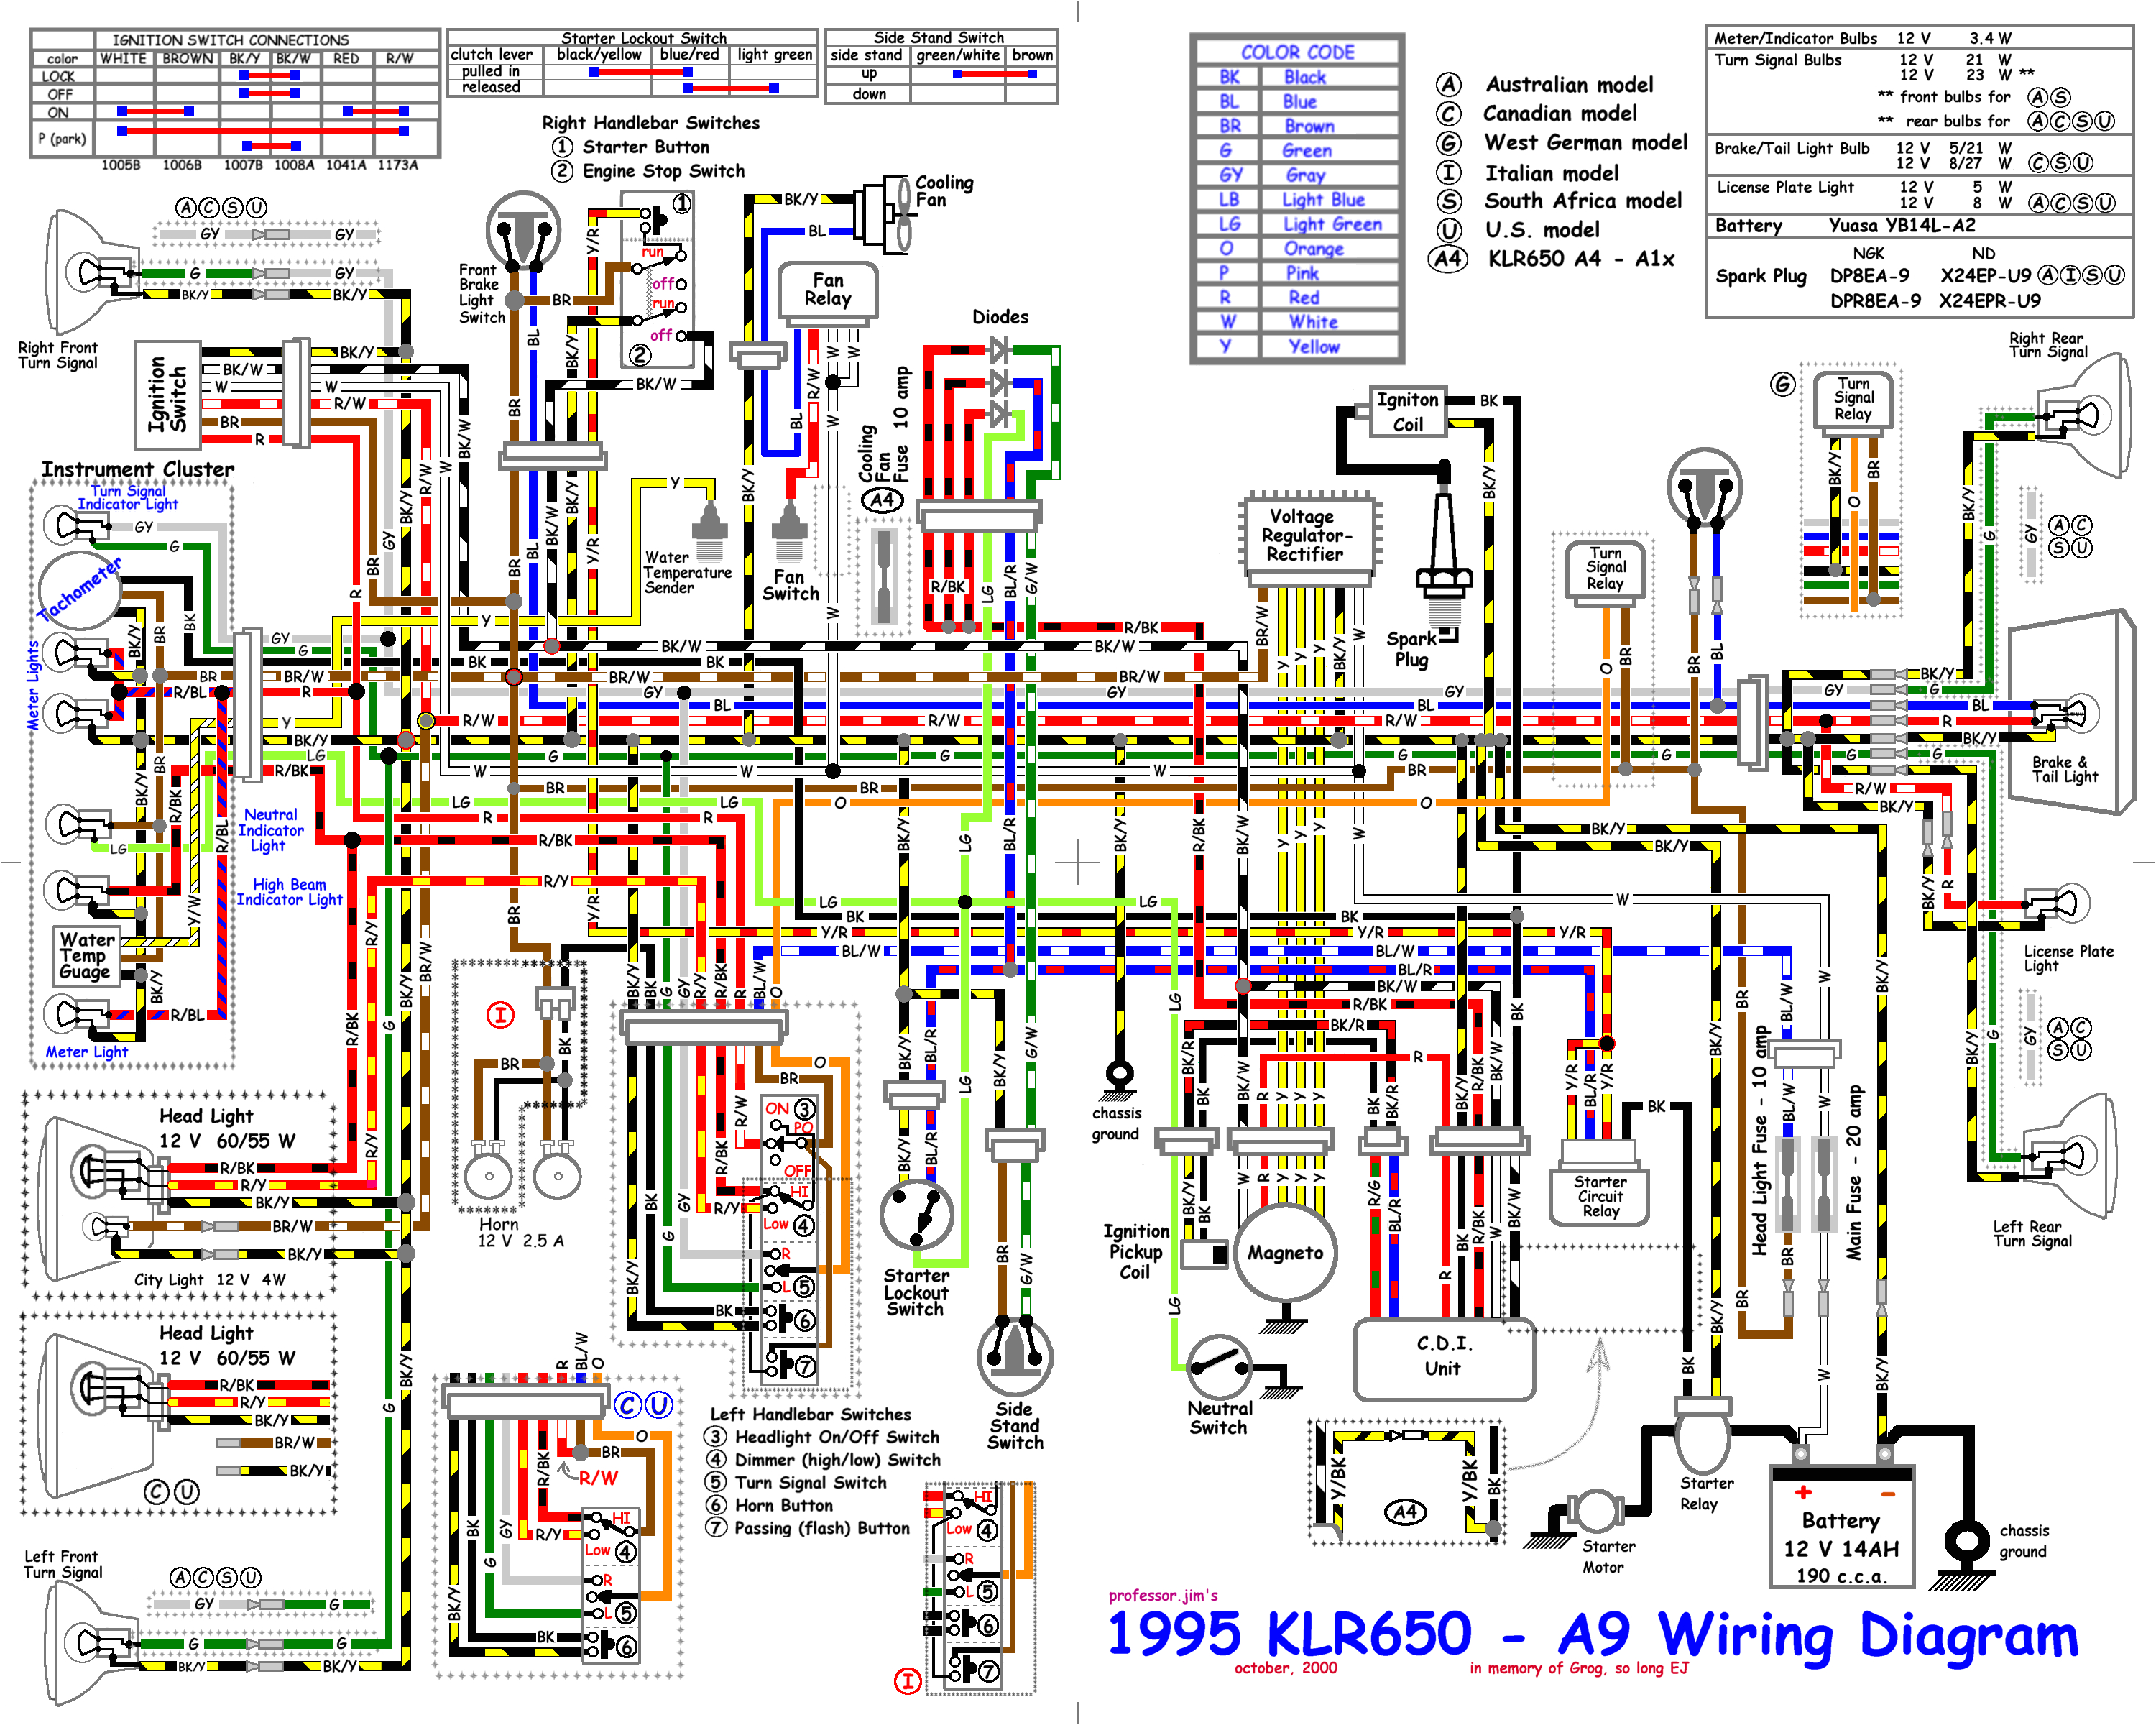 color wiring diagram blog wiring diagram wiring diagram color coding by jorge menchu